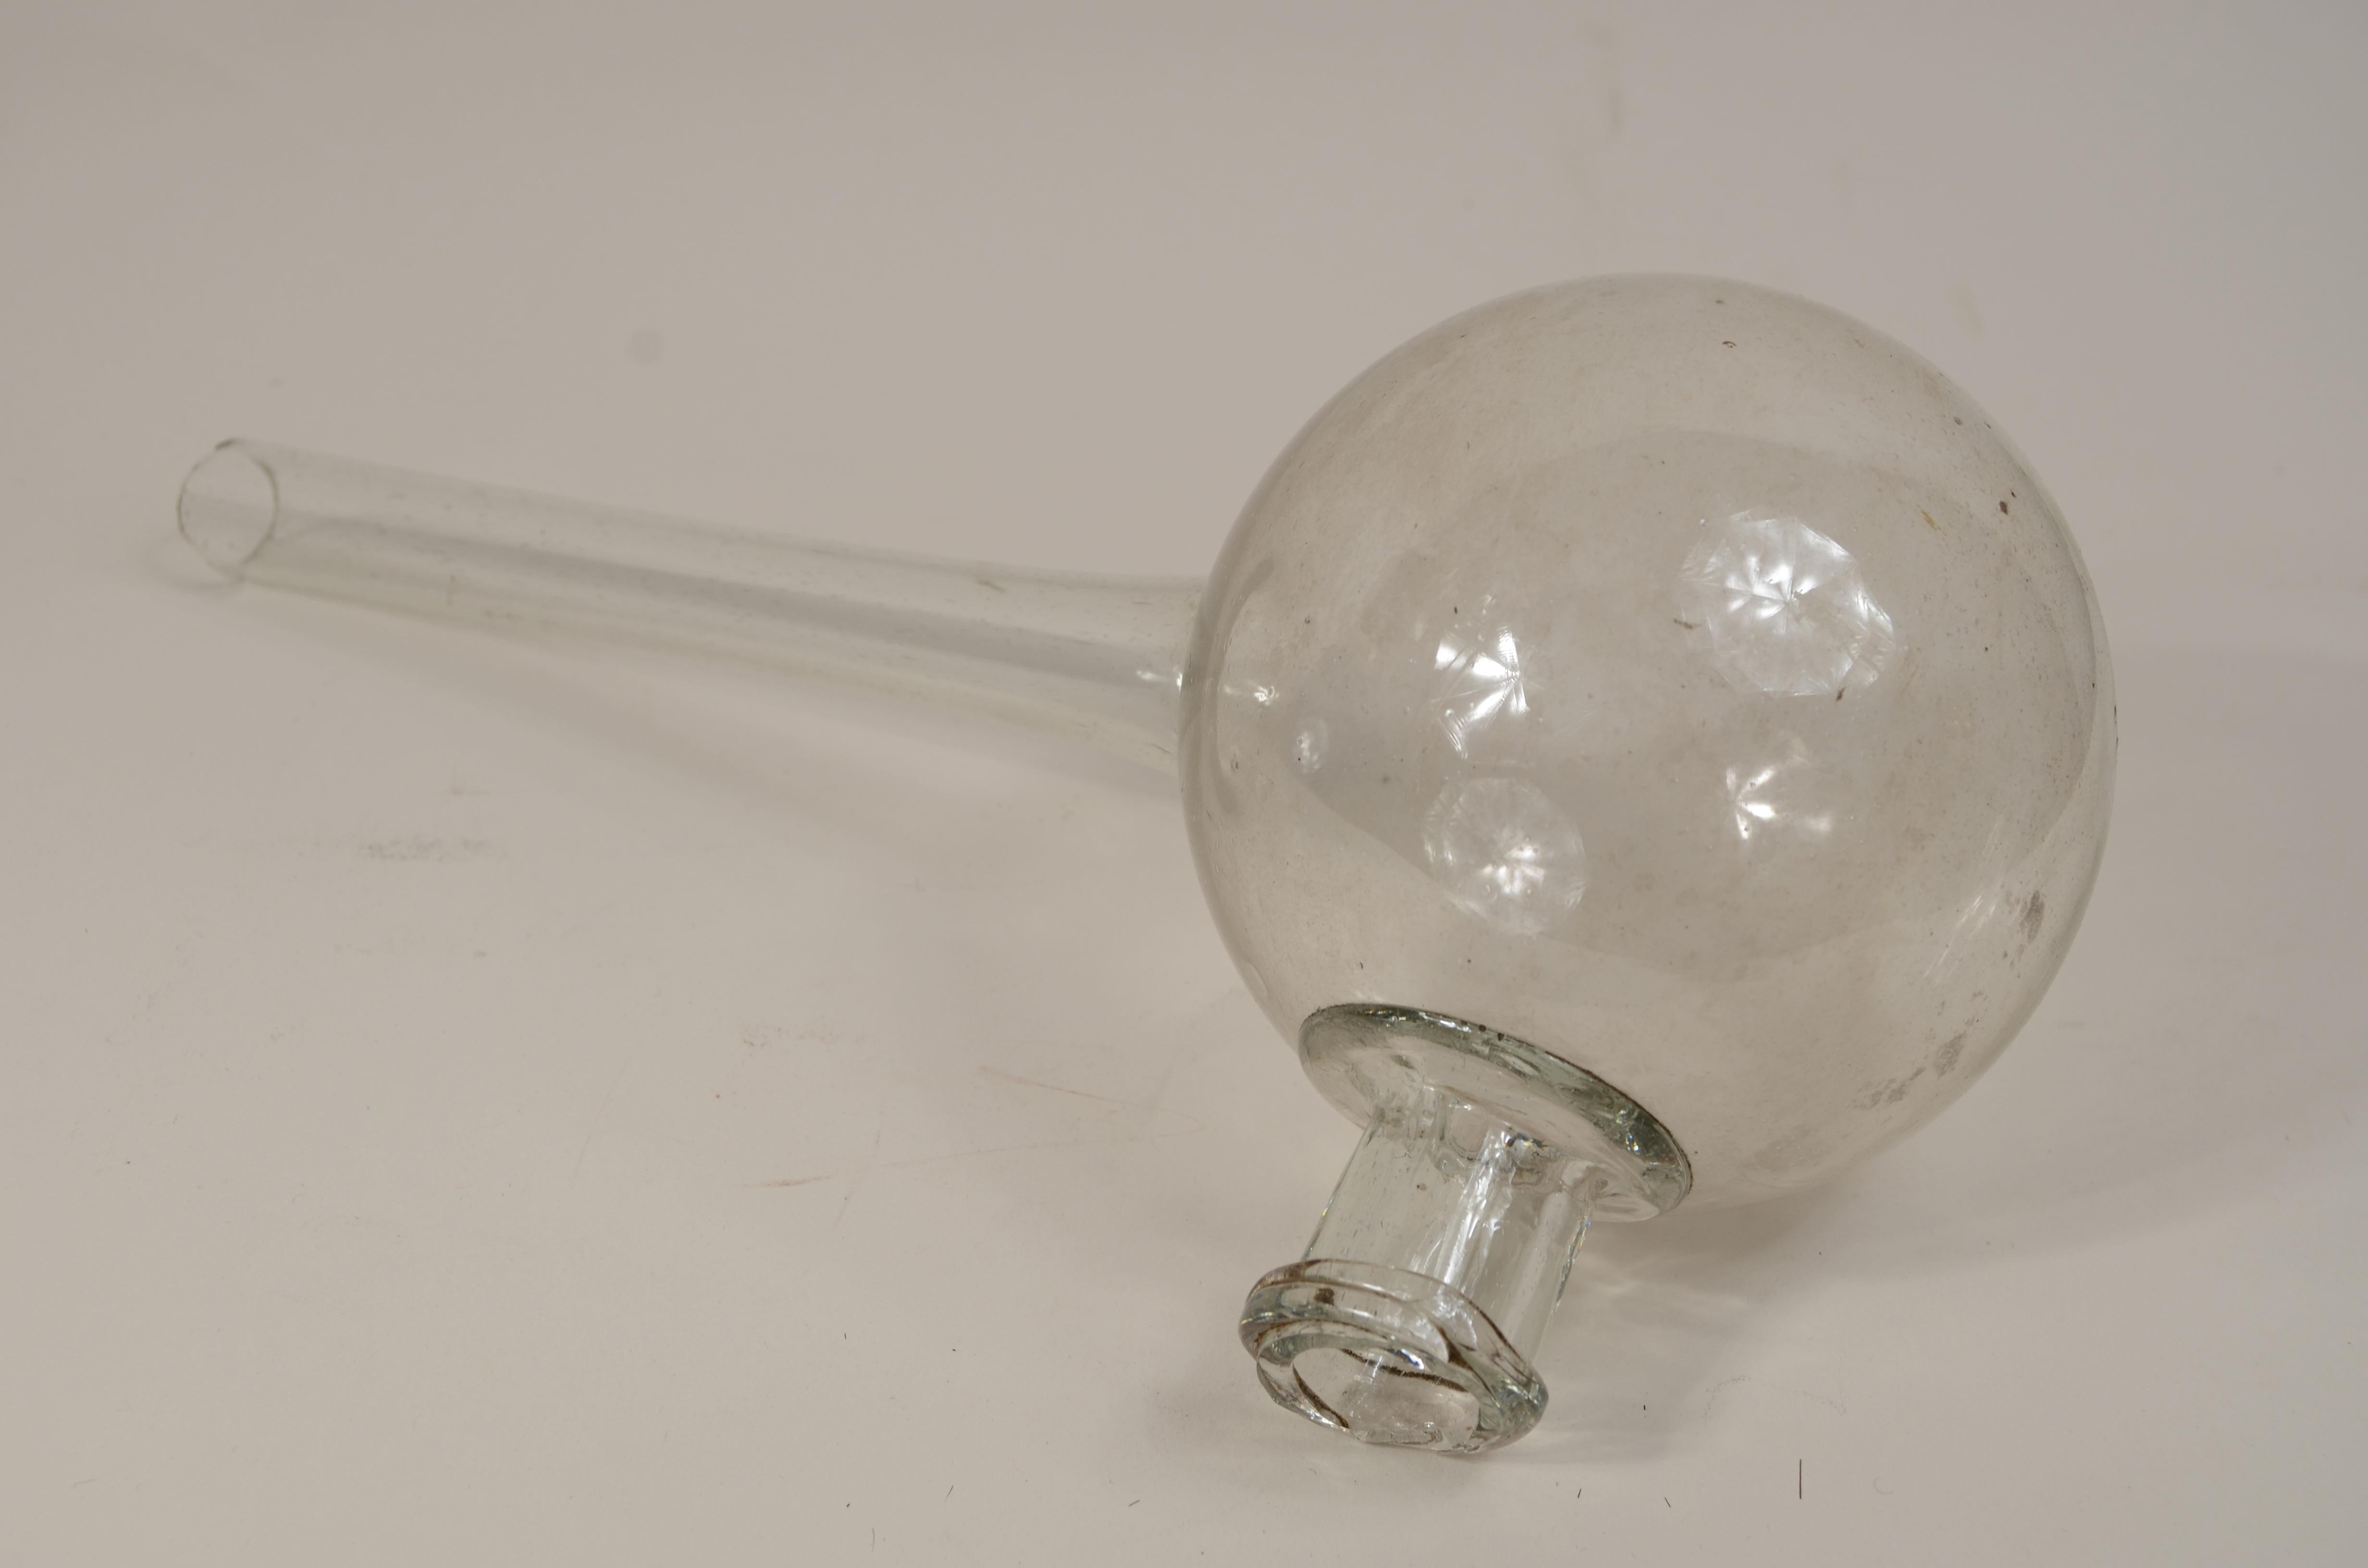 Transparent blown glass laboratory retort from the early 19th century, used for distillation, has a spherical body and long neck in the center. 
Very Good Condition. Measures length cm 30 - inch 11.8, height cm 14 -inch 5.5, width cm 11 - inch 4.3. 